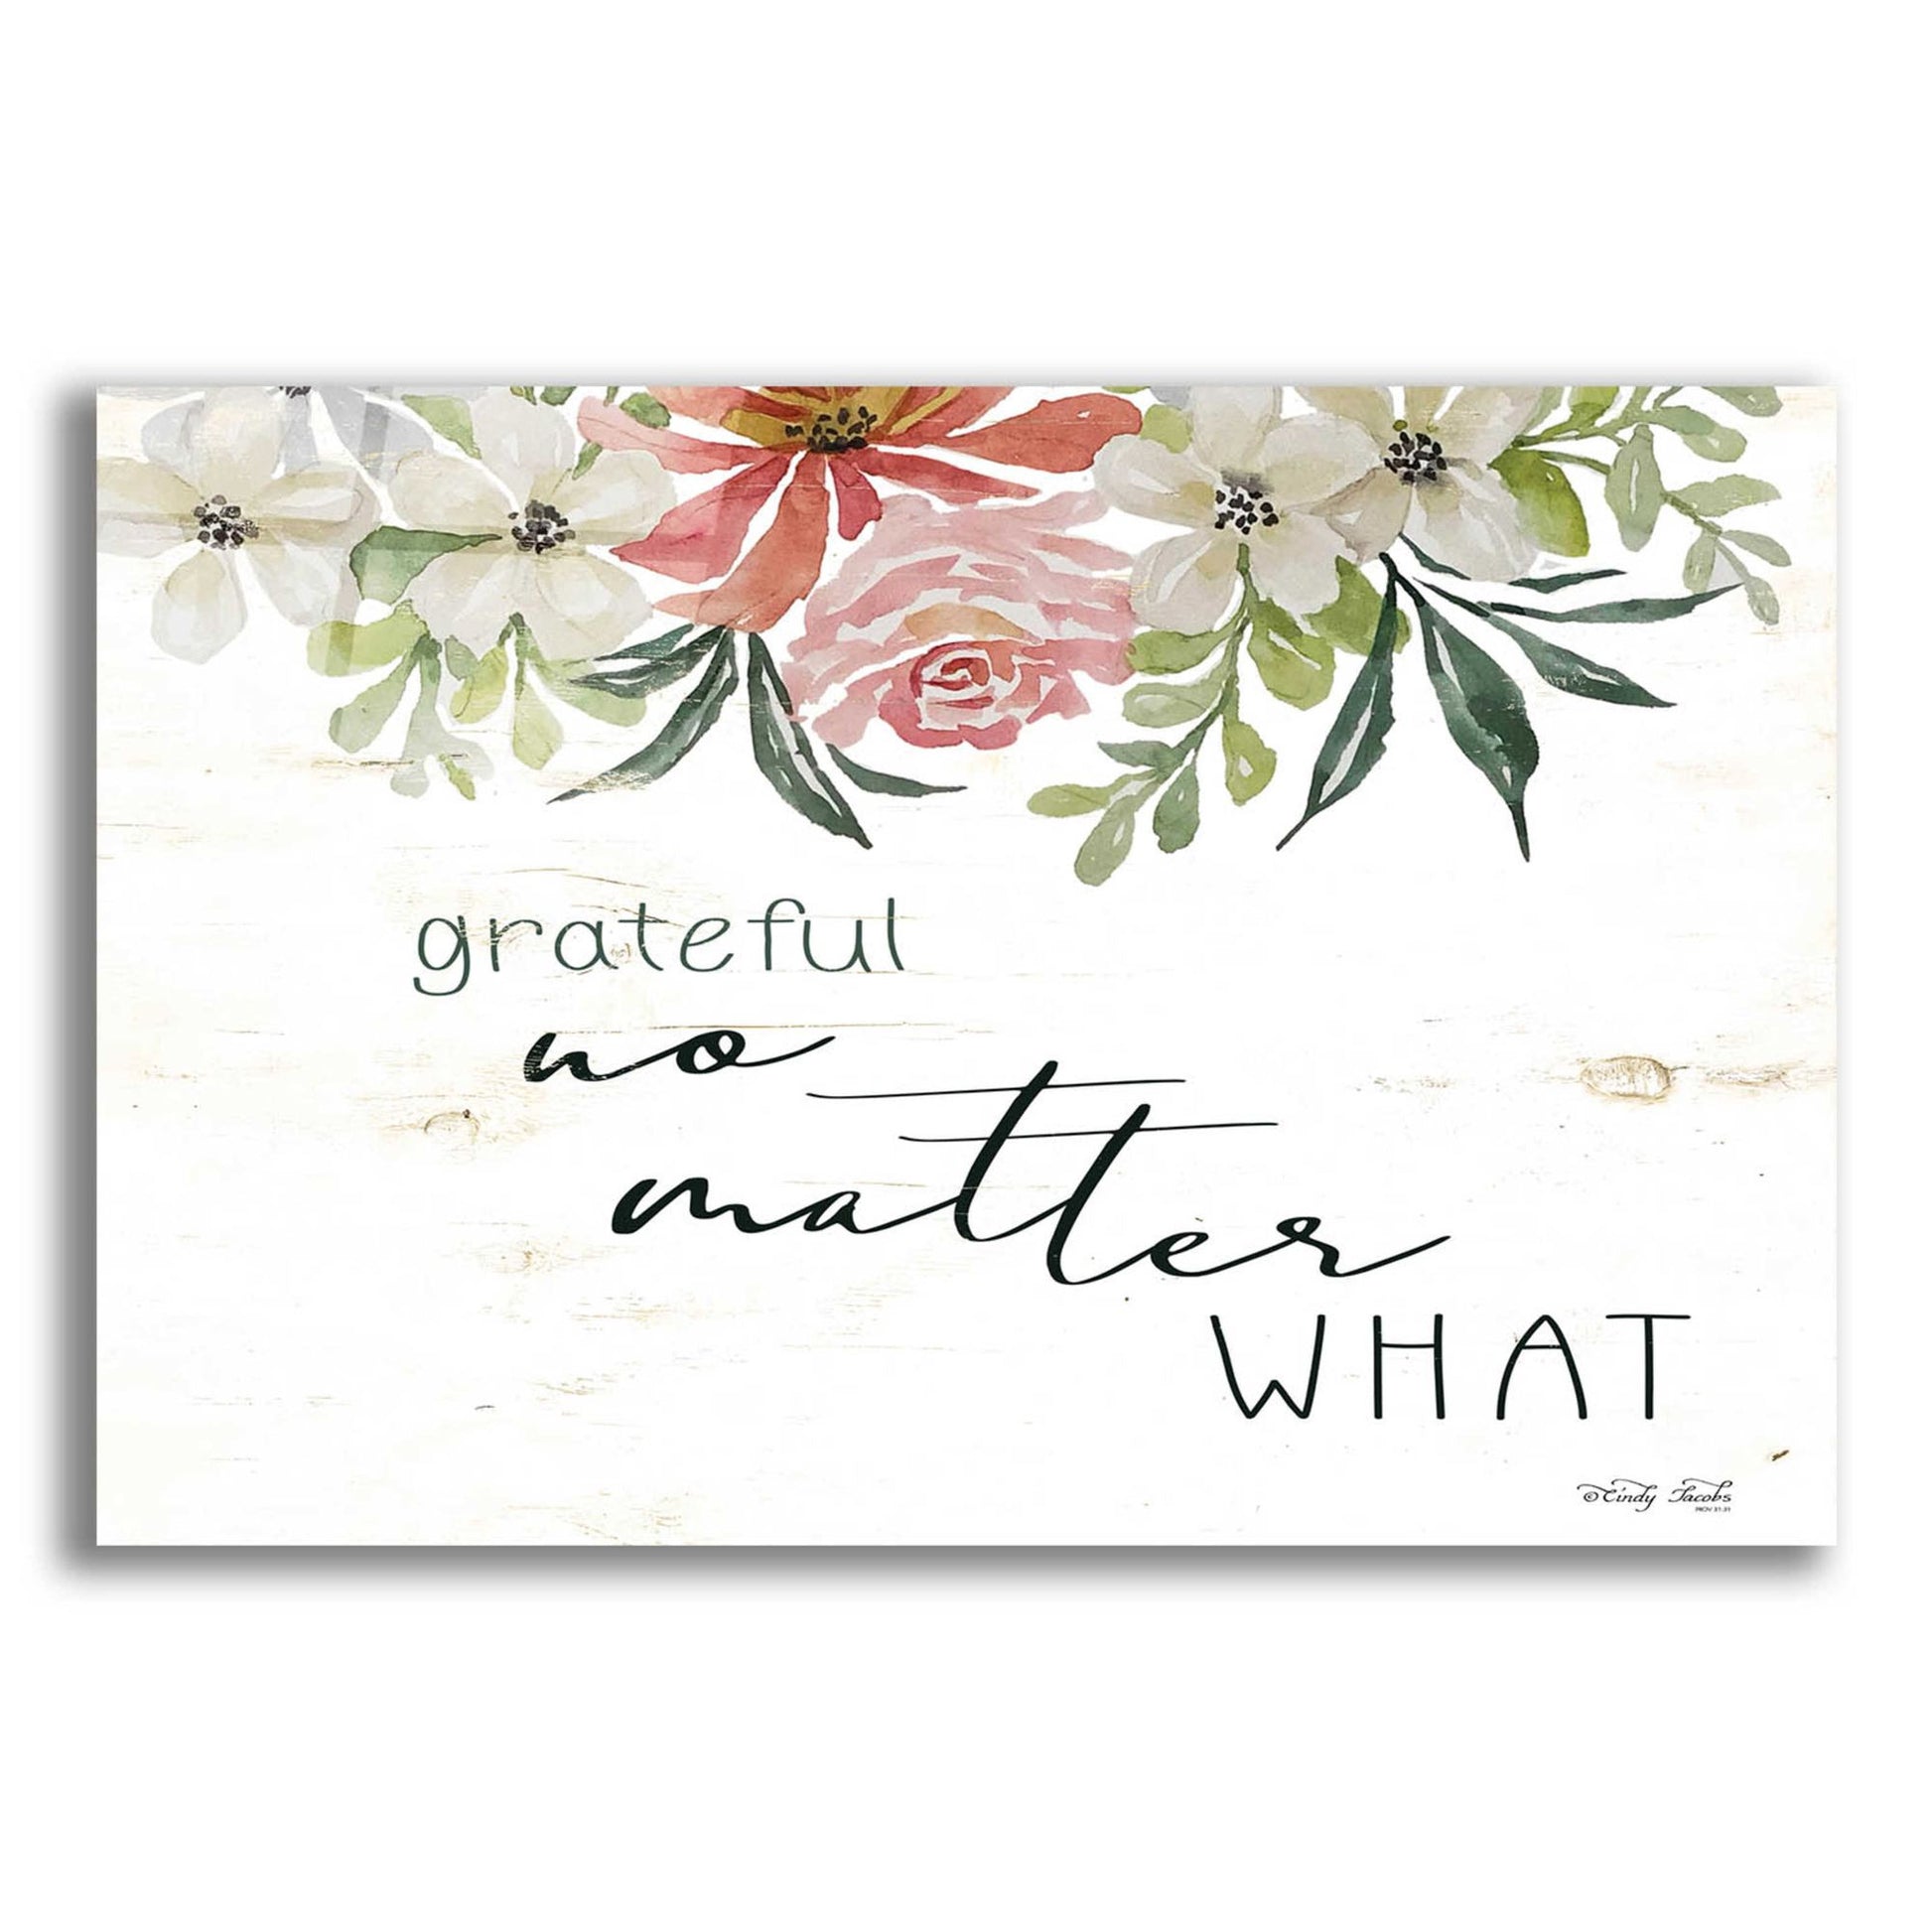 Epic Art 'Grateful No Matter What' by Cindy Jacobs, Acrylic Glass Wall Art